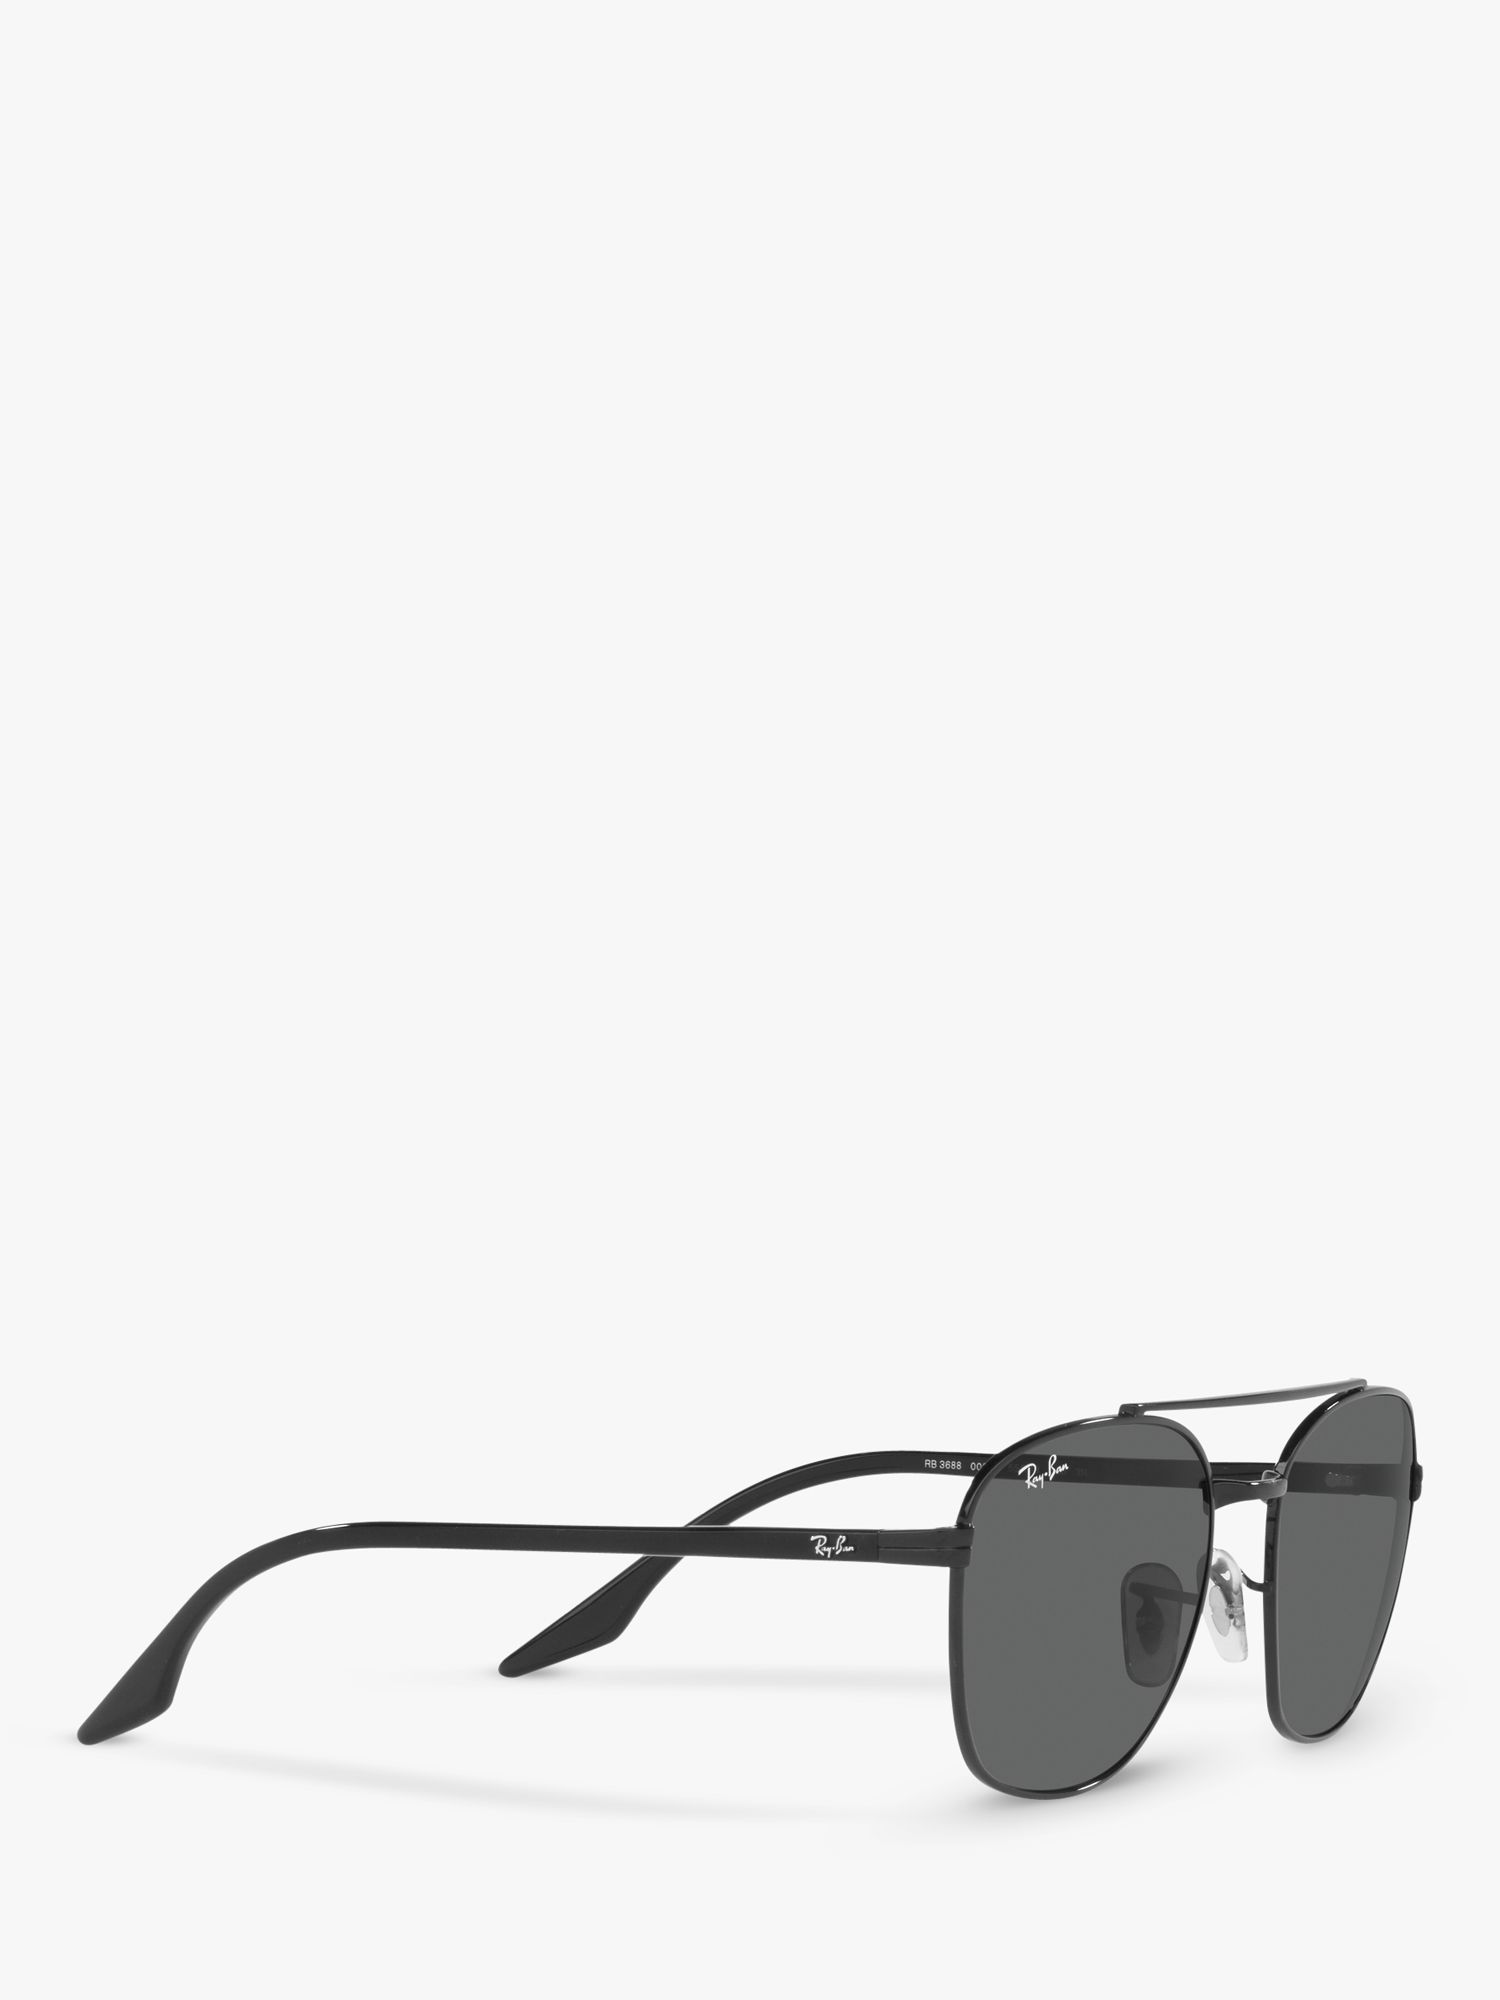 Ray Ban Rb3688 Unisex Square Sunglasses Blackgrey At John Lewis And Partners 1279